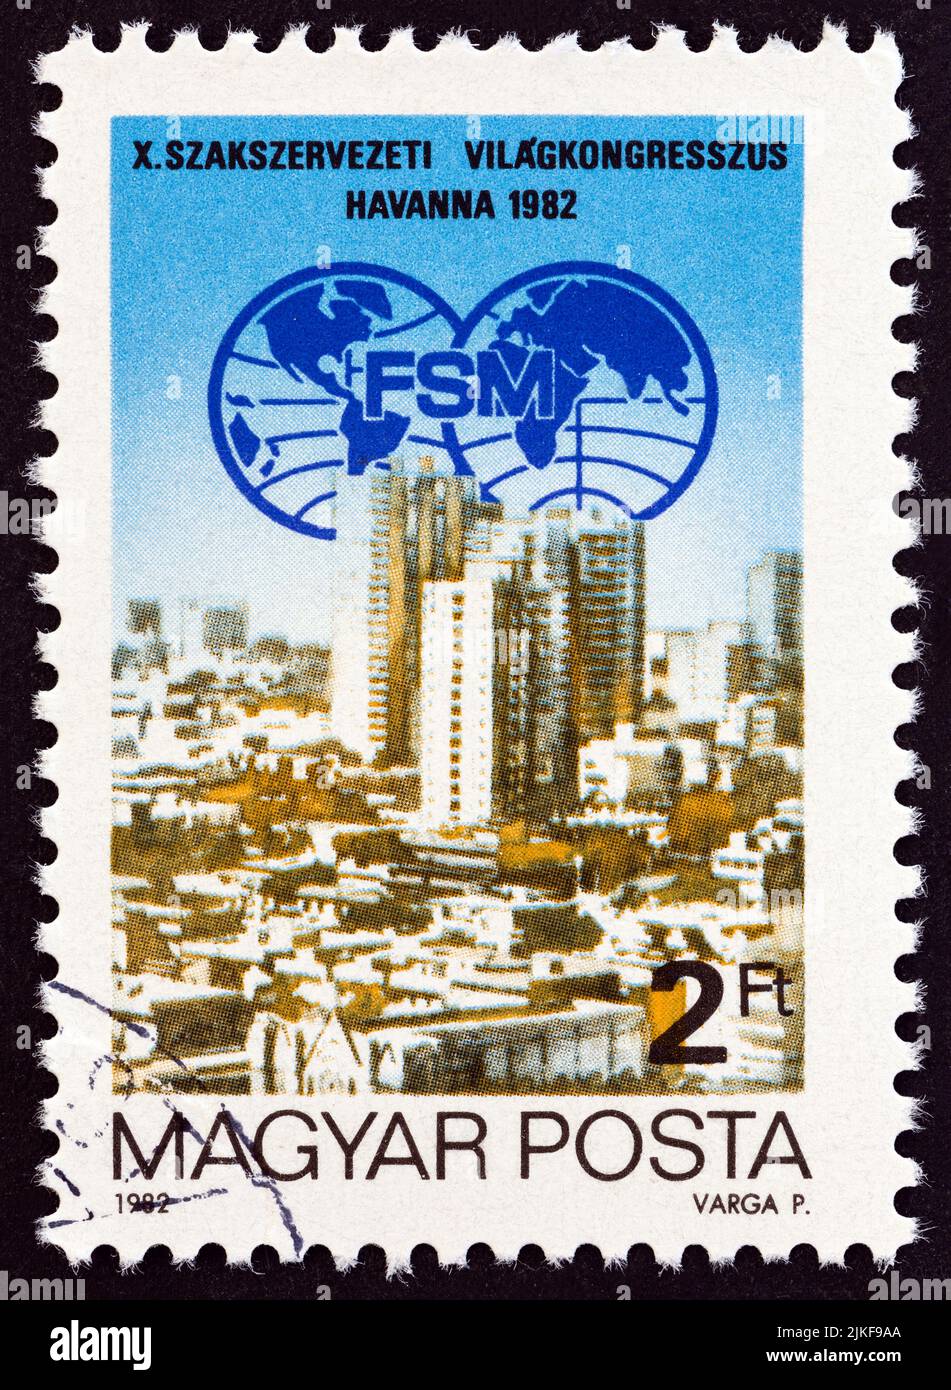 HUNGARY - CIRCA 1982: A stamp printed in Hungary issued for the 10th World Trade Unions Federation Congress, Havana shows congress emblem and Havana. Stock Photo